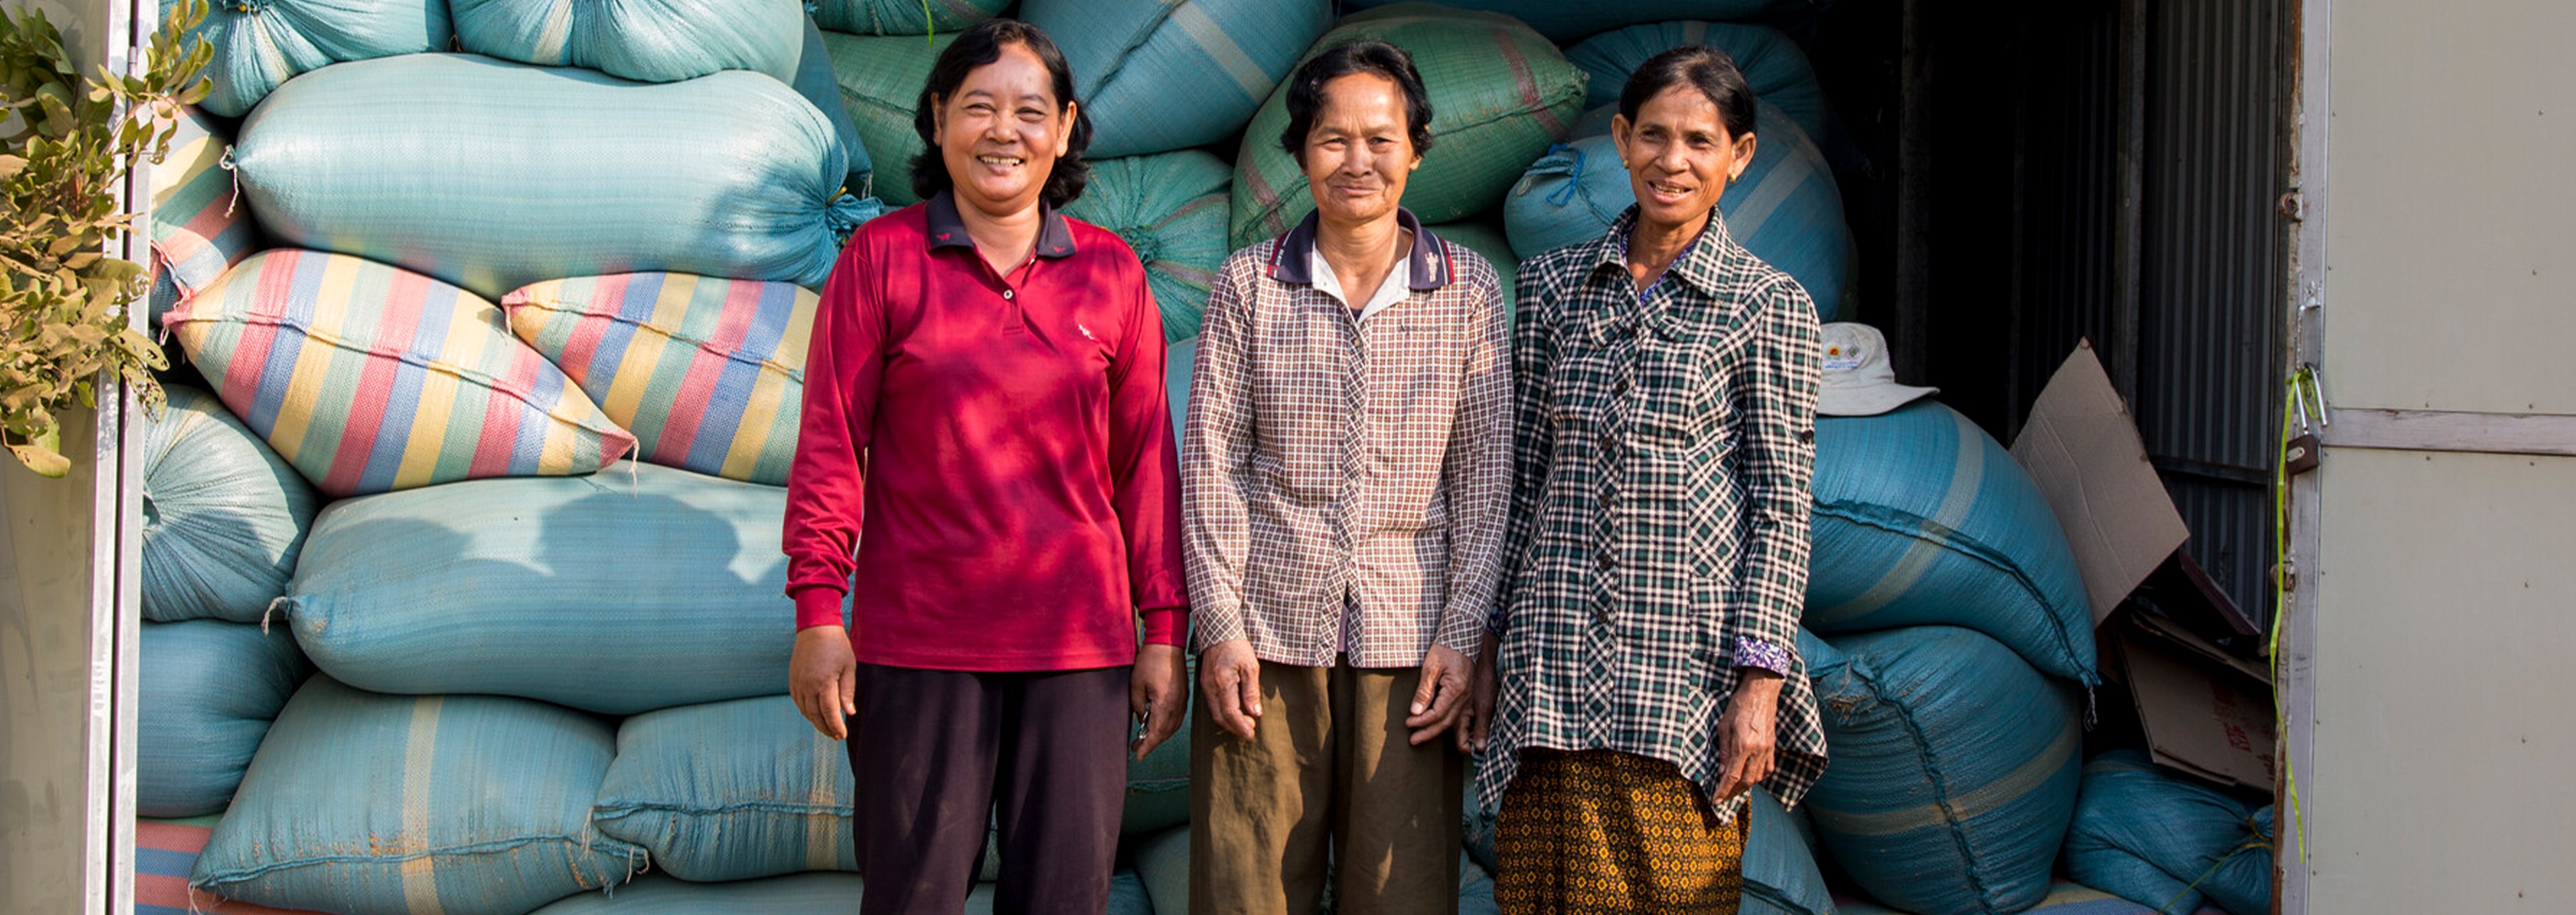 LVRSustainable pour Oxfam : Empowering Women, Improving Society